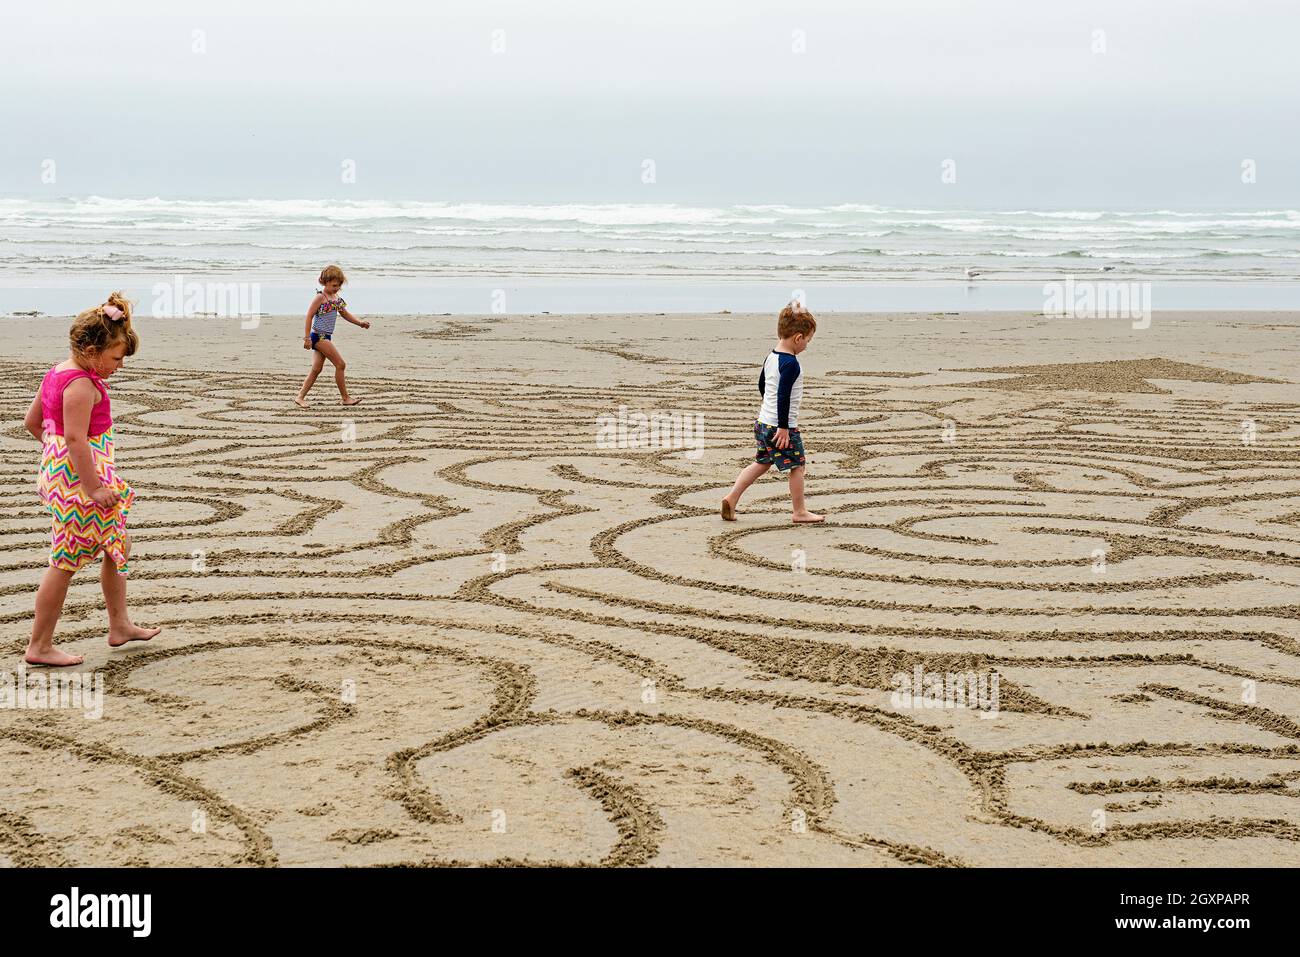 Children running through a beach maze at Cannon Beach Oregon on June 28th during the heatwave that hit the Northwestern United States. Stock Photo